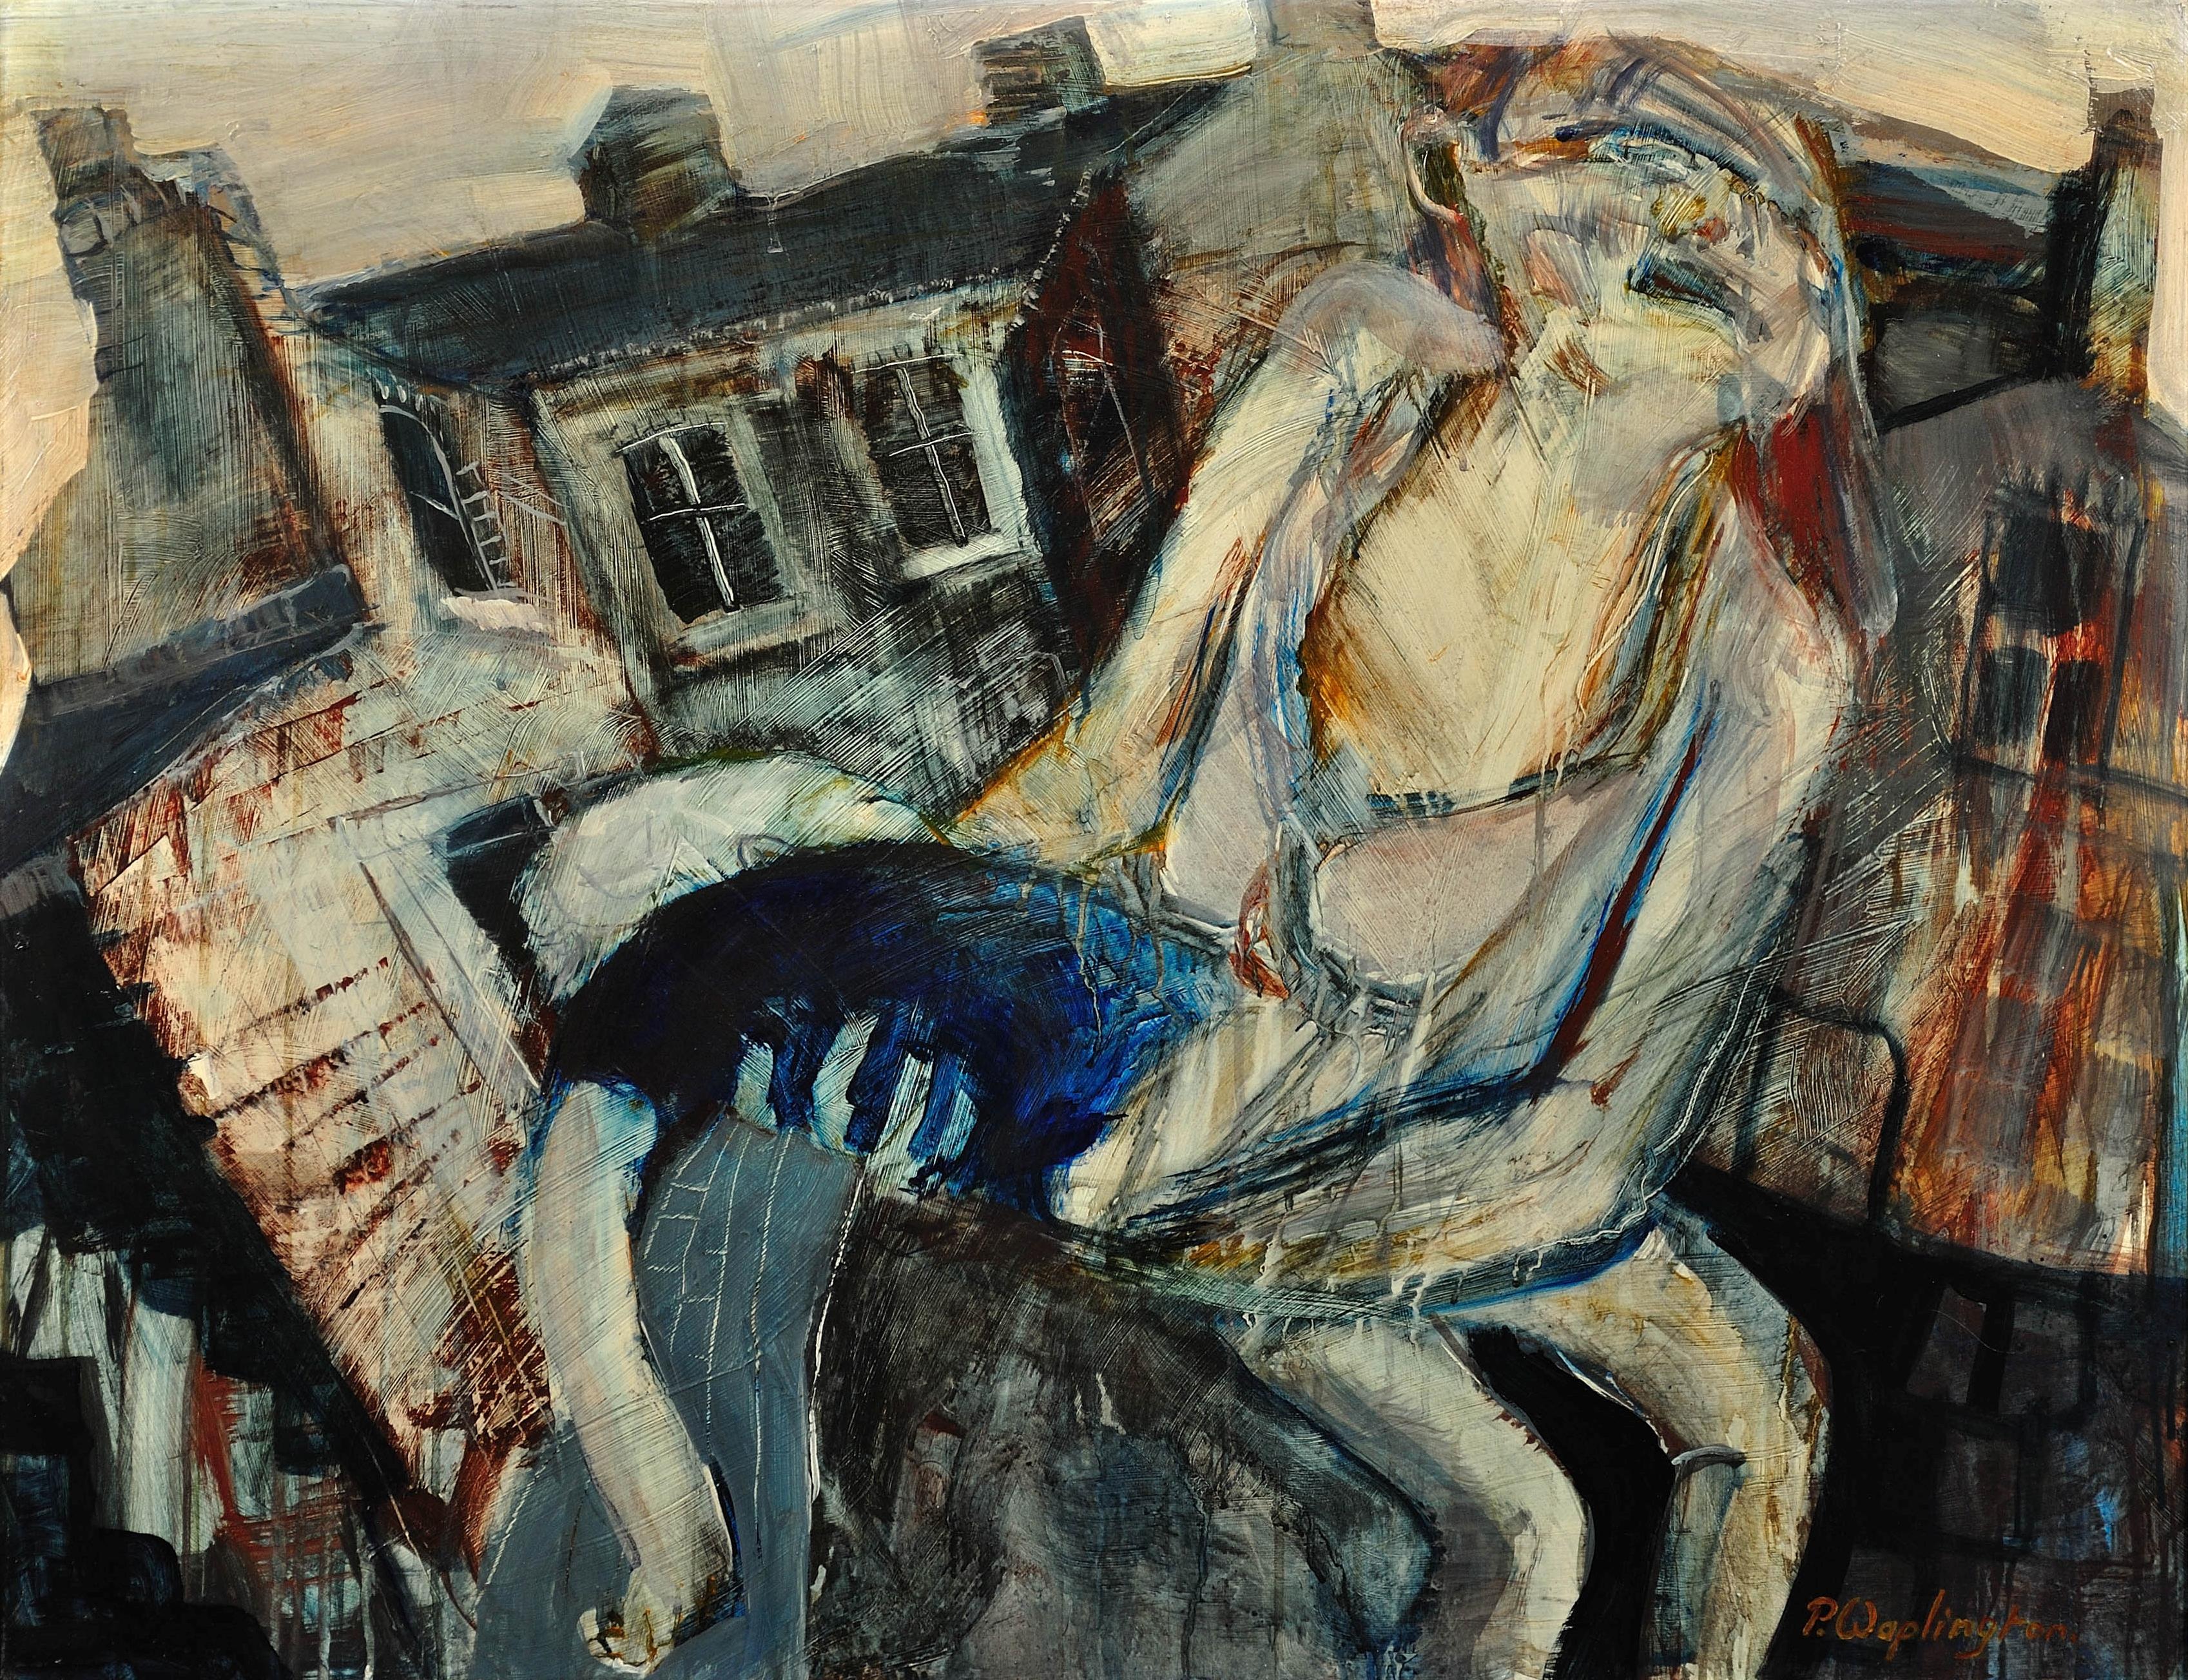 Mother with Injured Child, Forest Fields, Nottingham. Real Life. Drama. - Modern Mixed Media Art by Paul Anthony Waplington